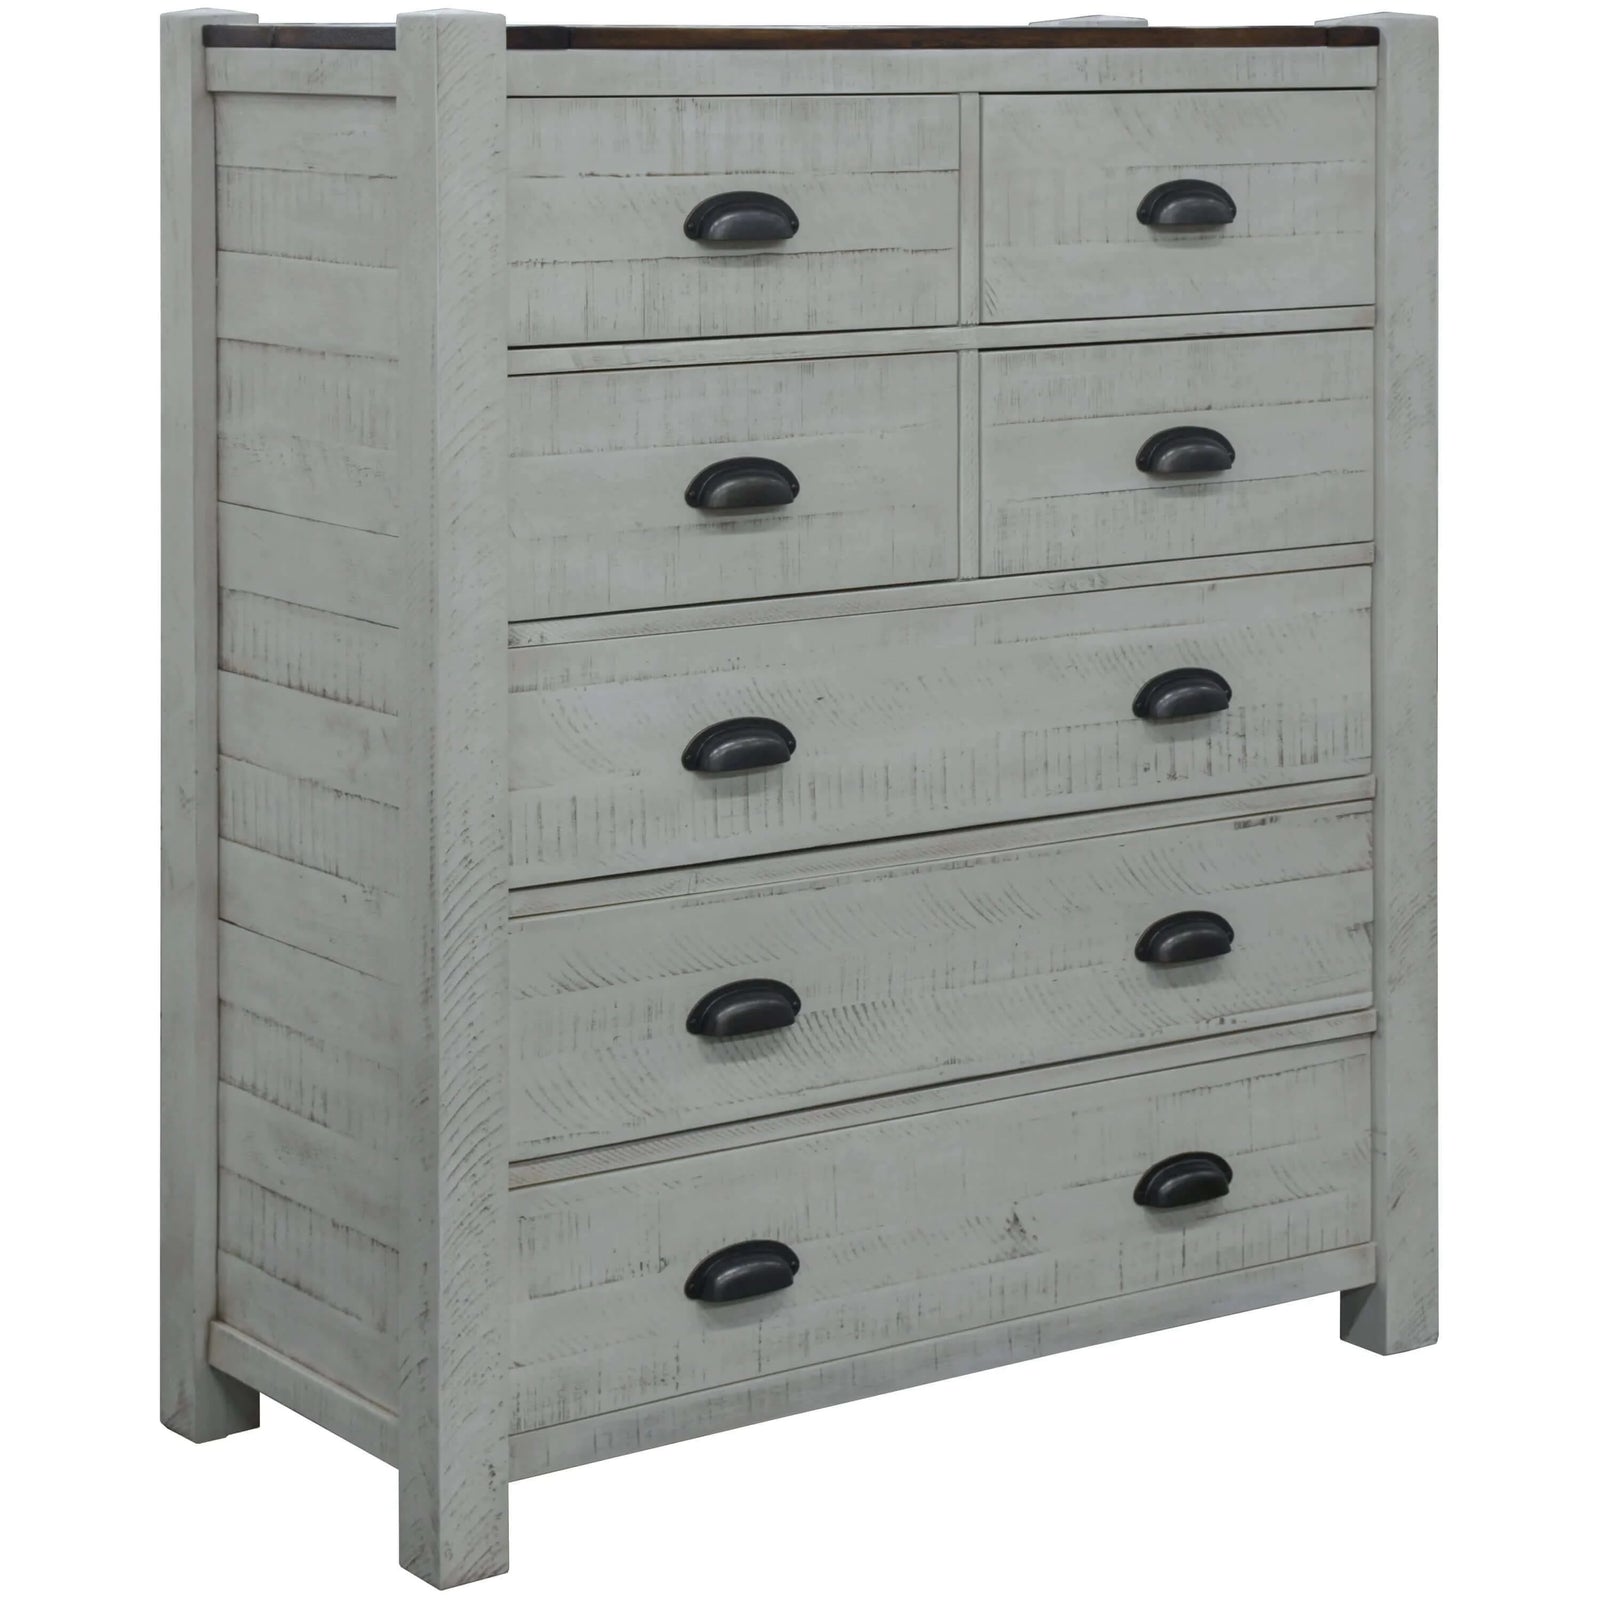 Buy erica tallboy 7 chest of drawers solid acacia timber wood cabinet brown white - upinteriors-Upinteriors